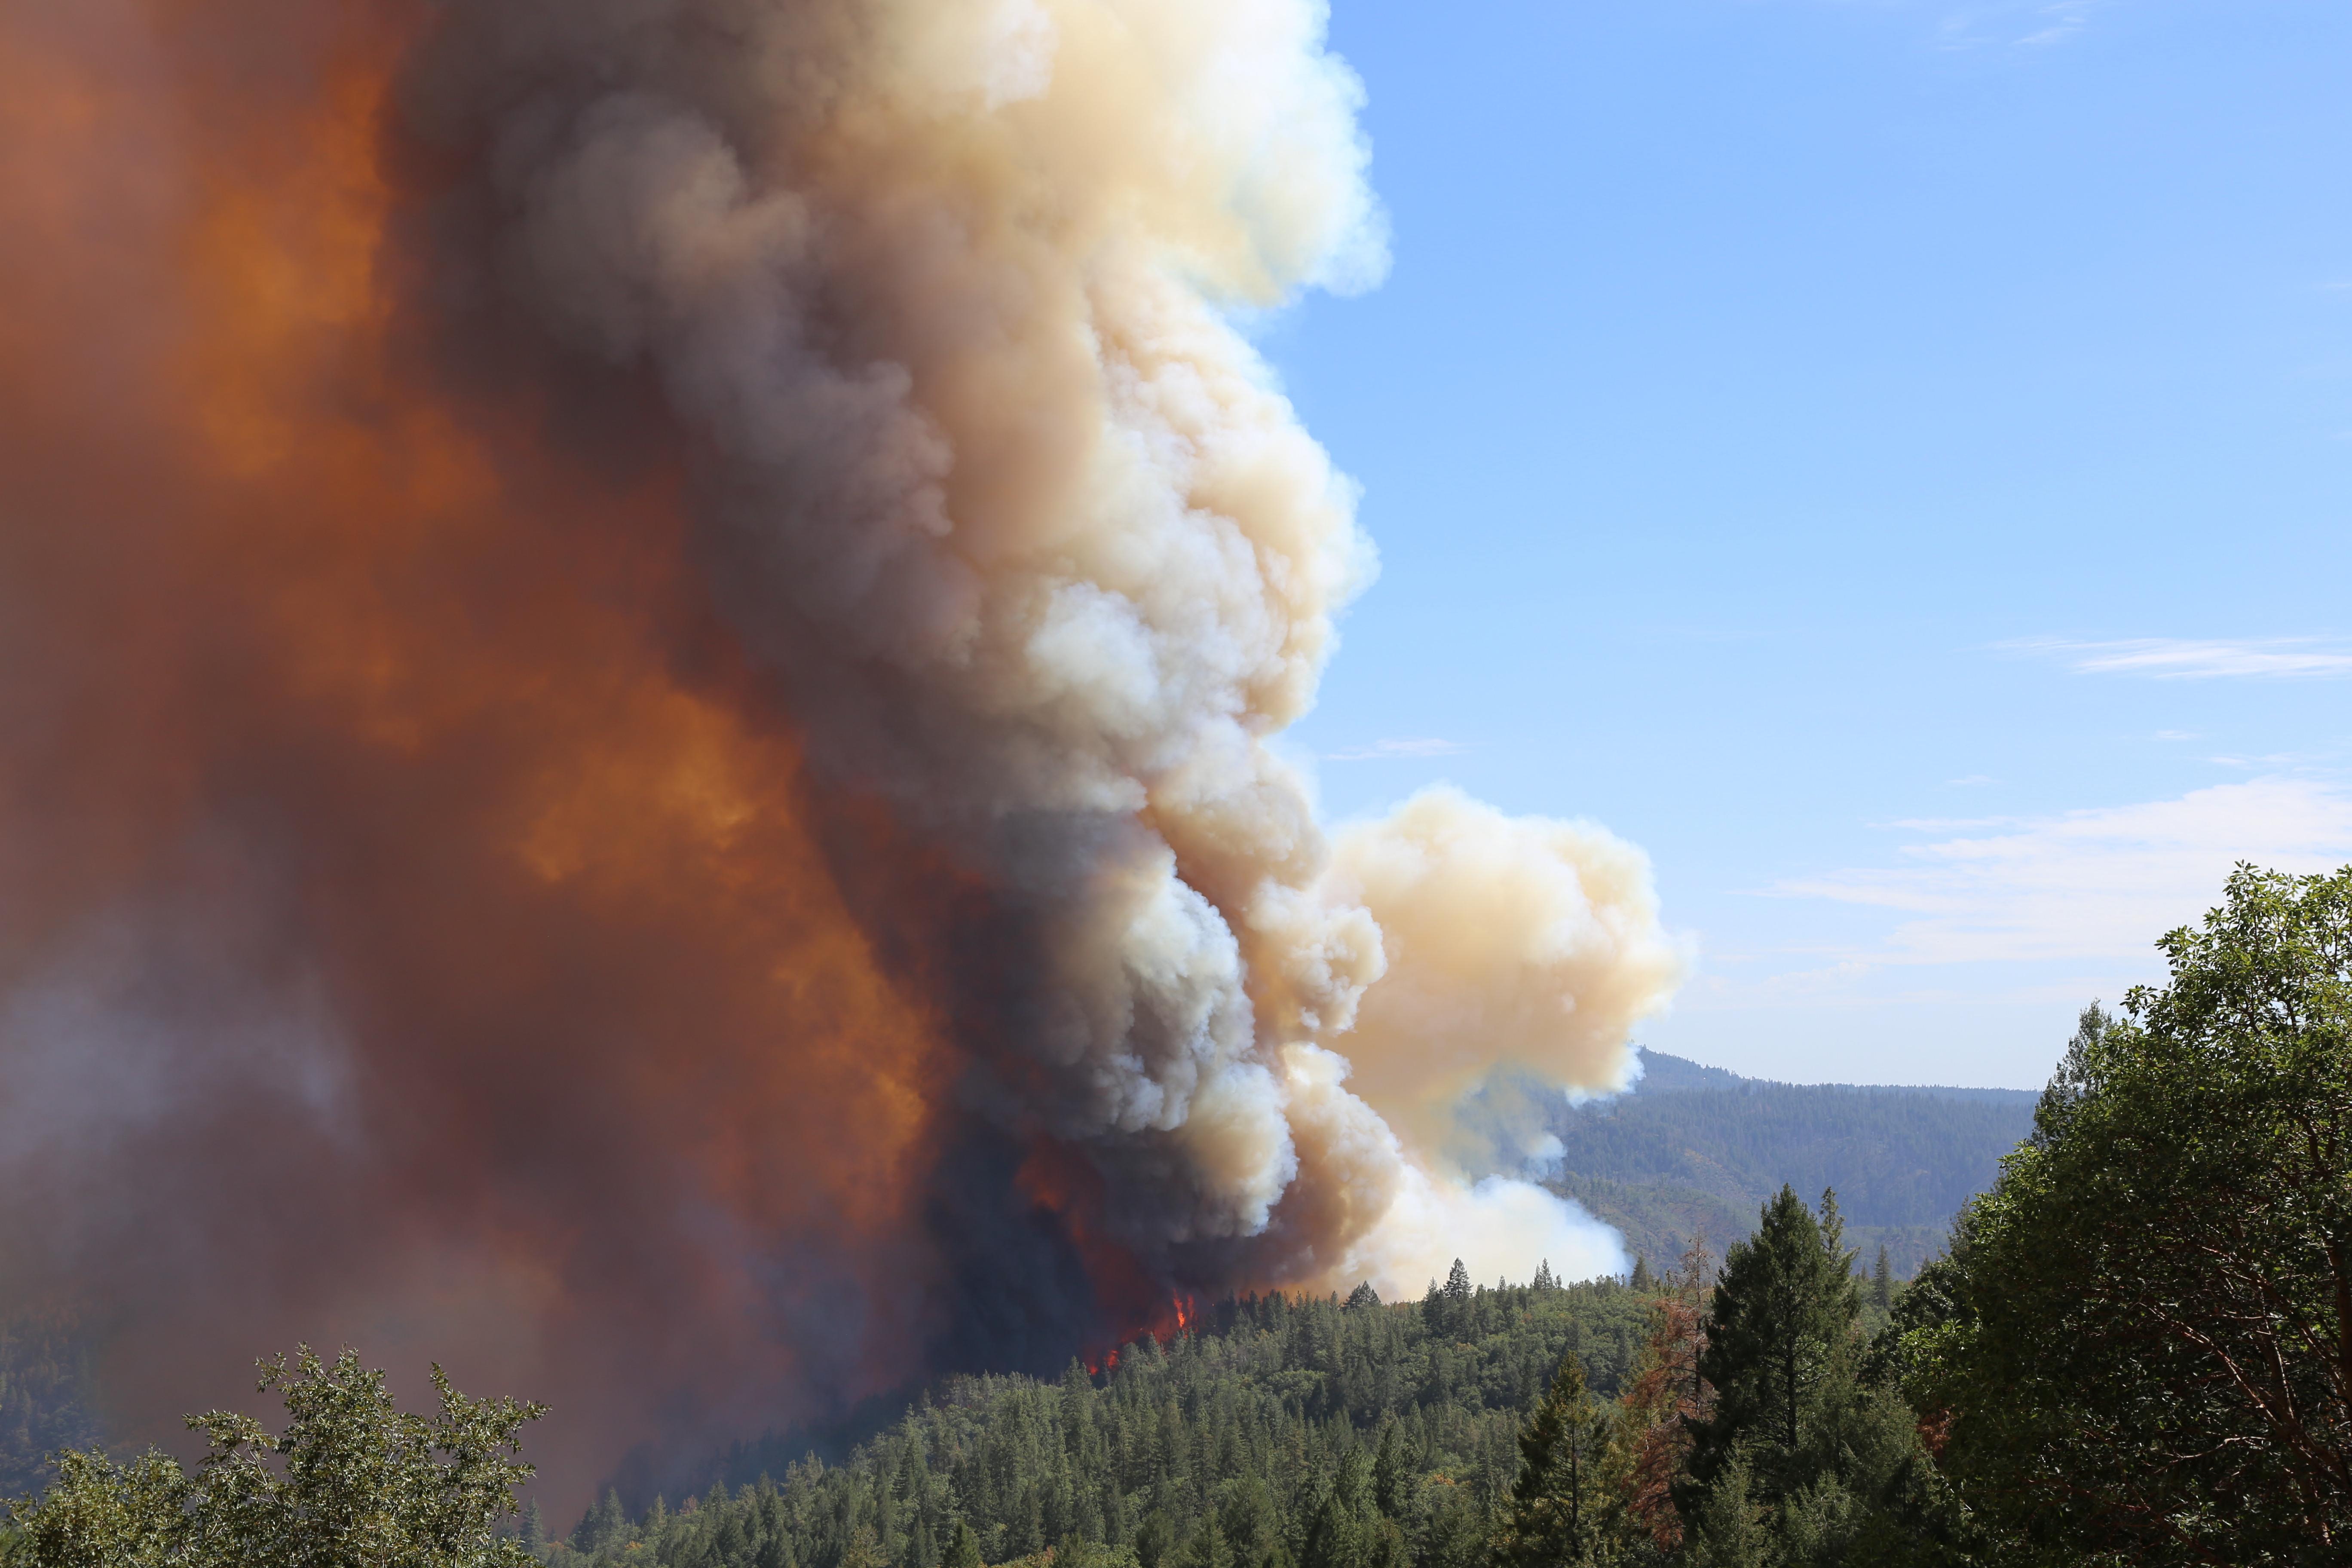 A large plume of white and black wildfire smoke against blue sky. Red flames glowing out of the tops of coniferous trees on steep mountainsides.